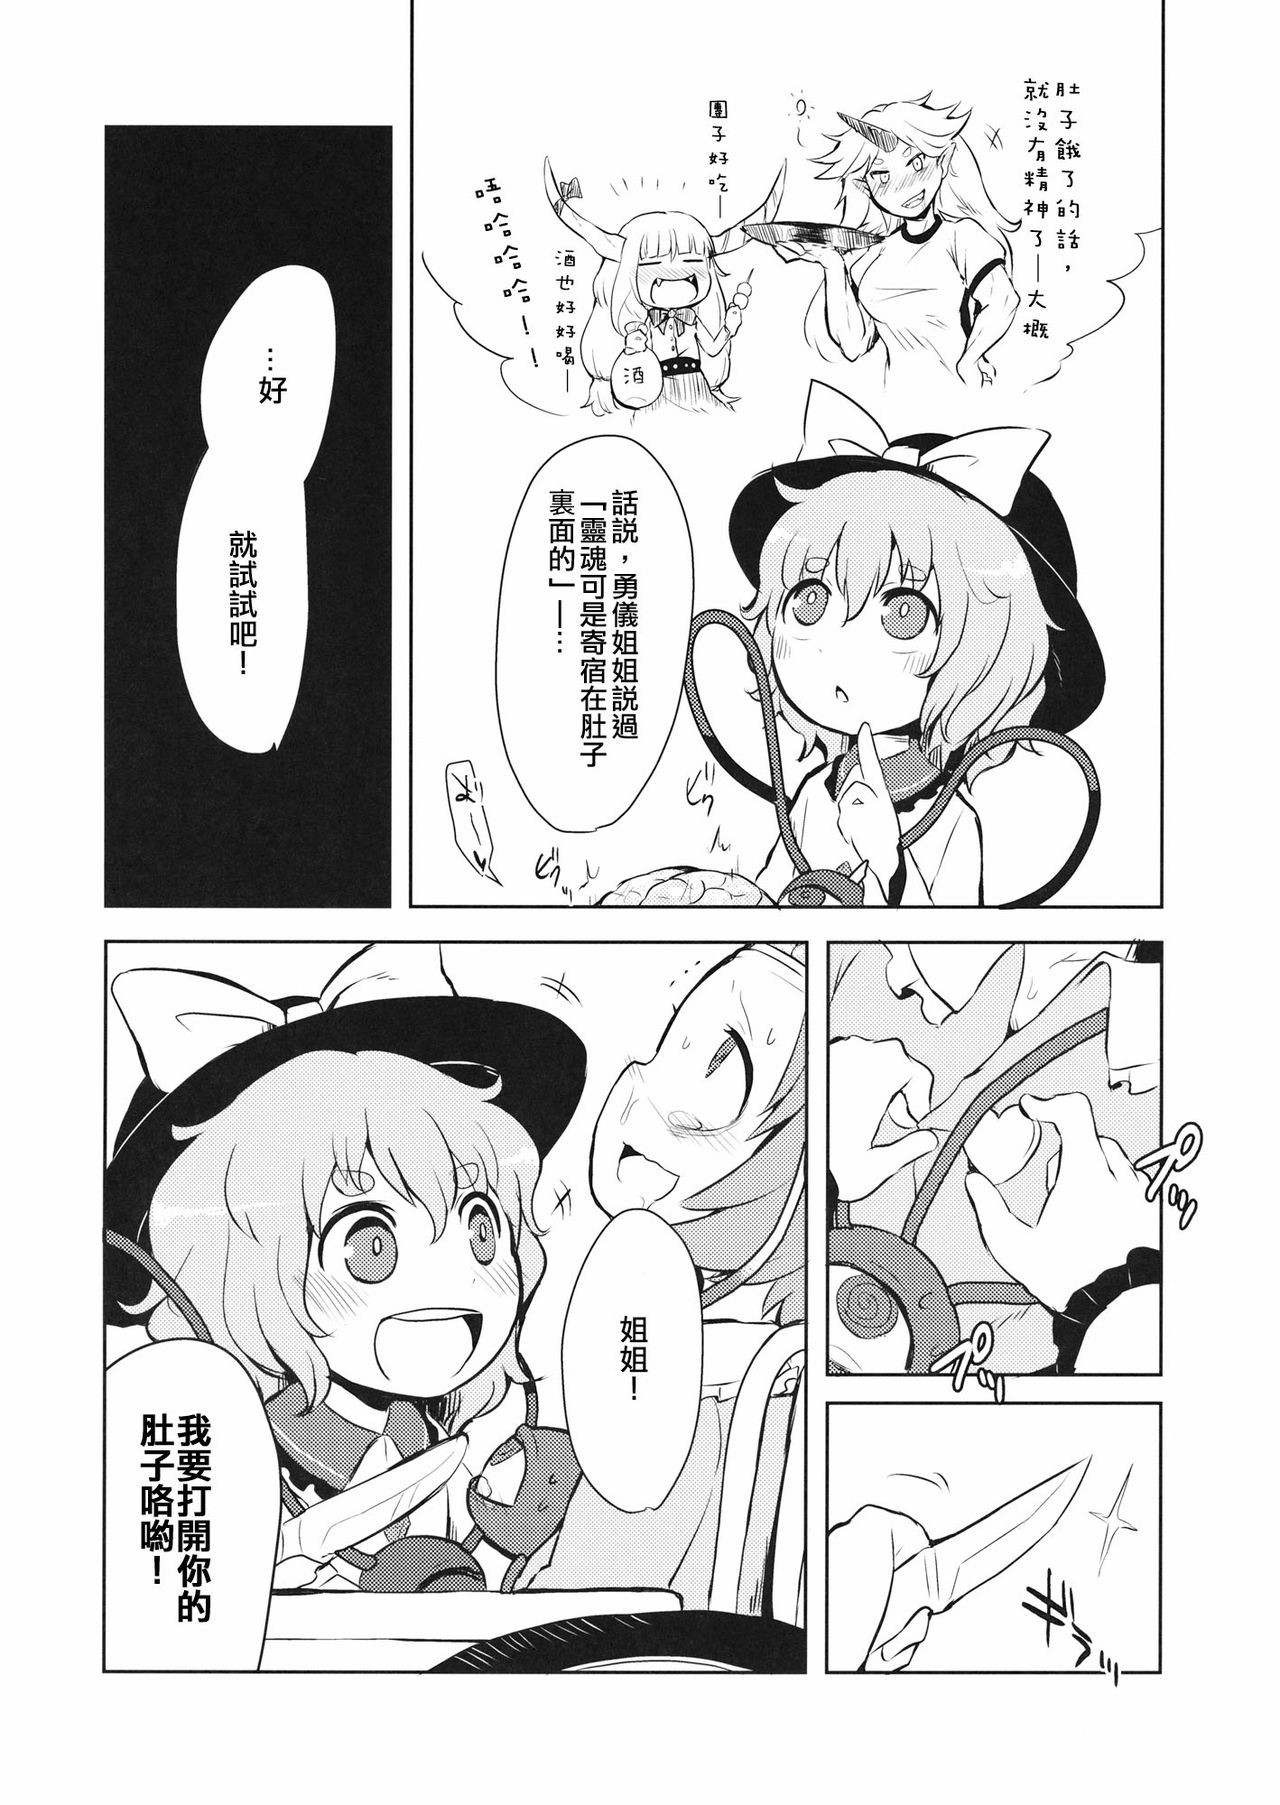 (Reitaisai 13) [02 (Harasaki)] FREAKS OUT! (Touhou Project) [Chinese] [沒有漢化] page 12 full